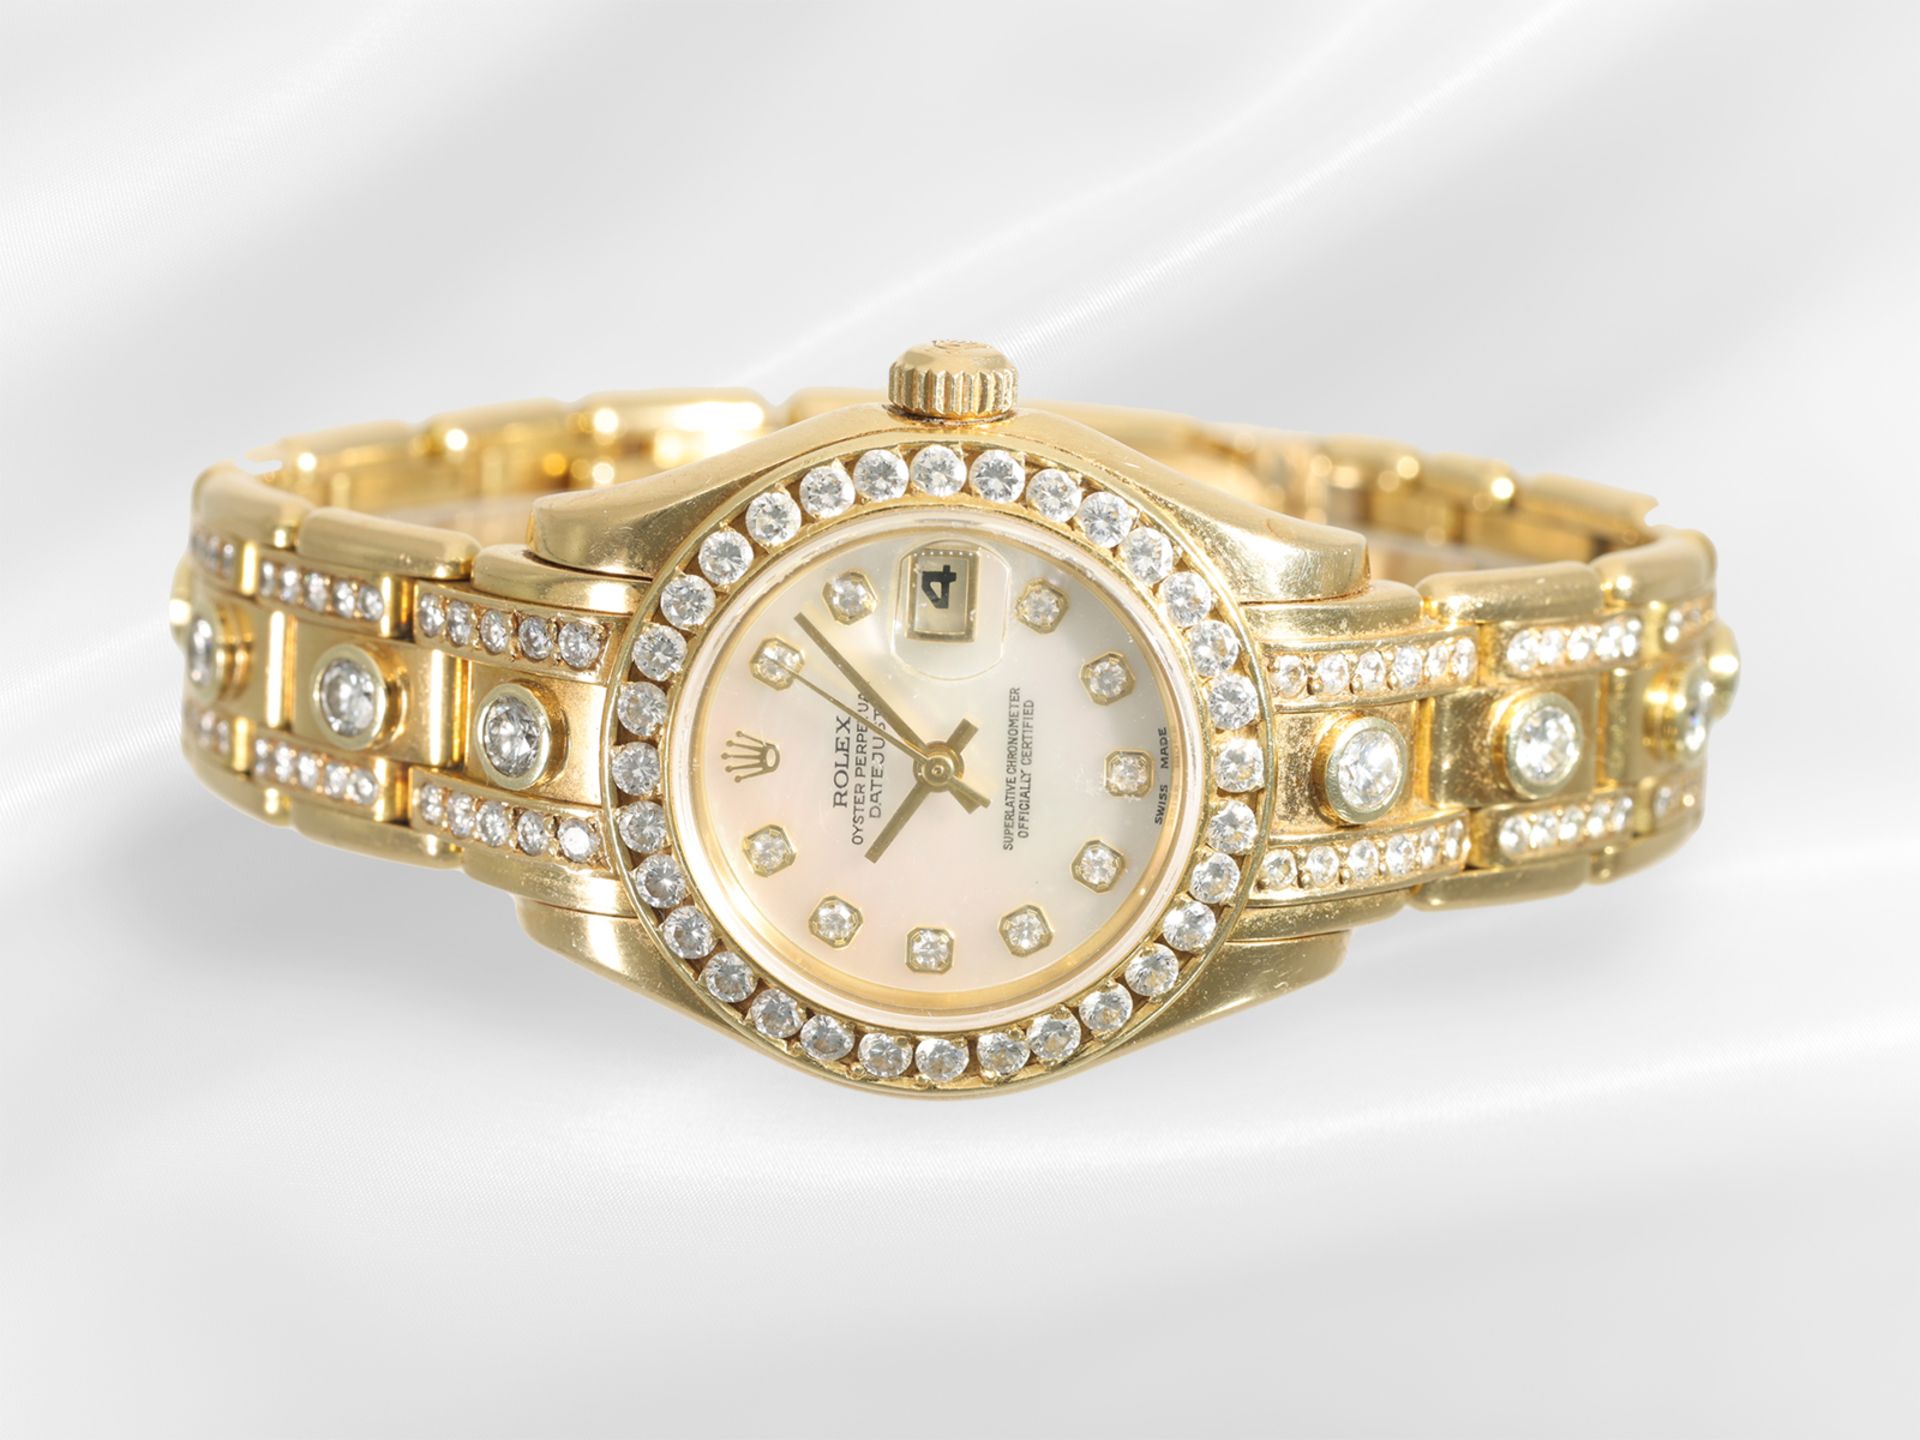 Wristwatch: wanted luxury ladies' watch Rolex Pearlmaster Ref.....with full brilliant-cut diamonds a - Image 2 of 6